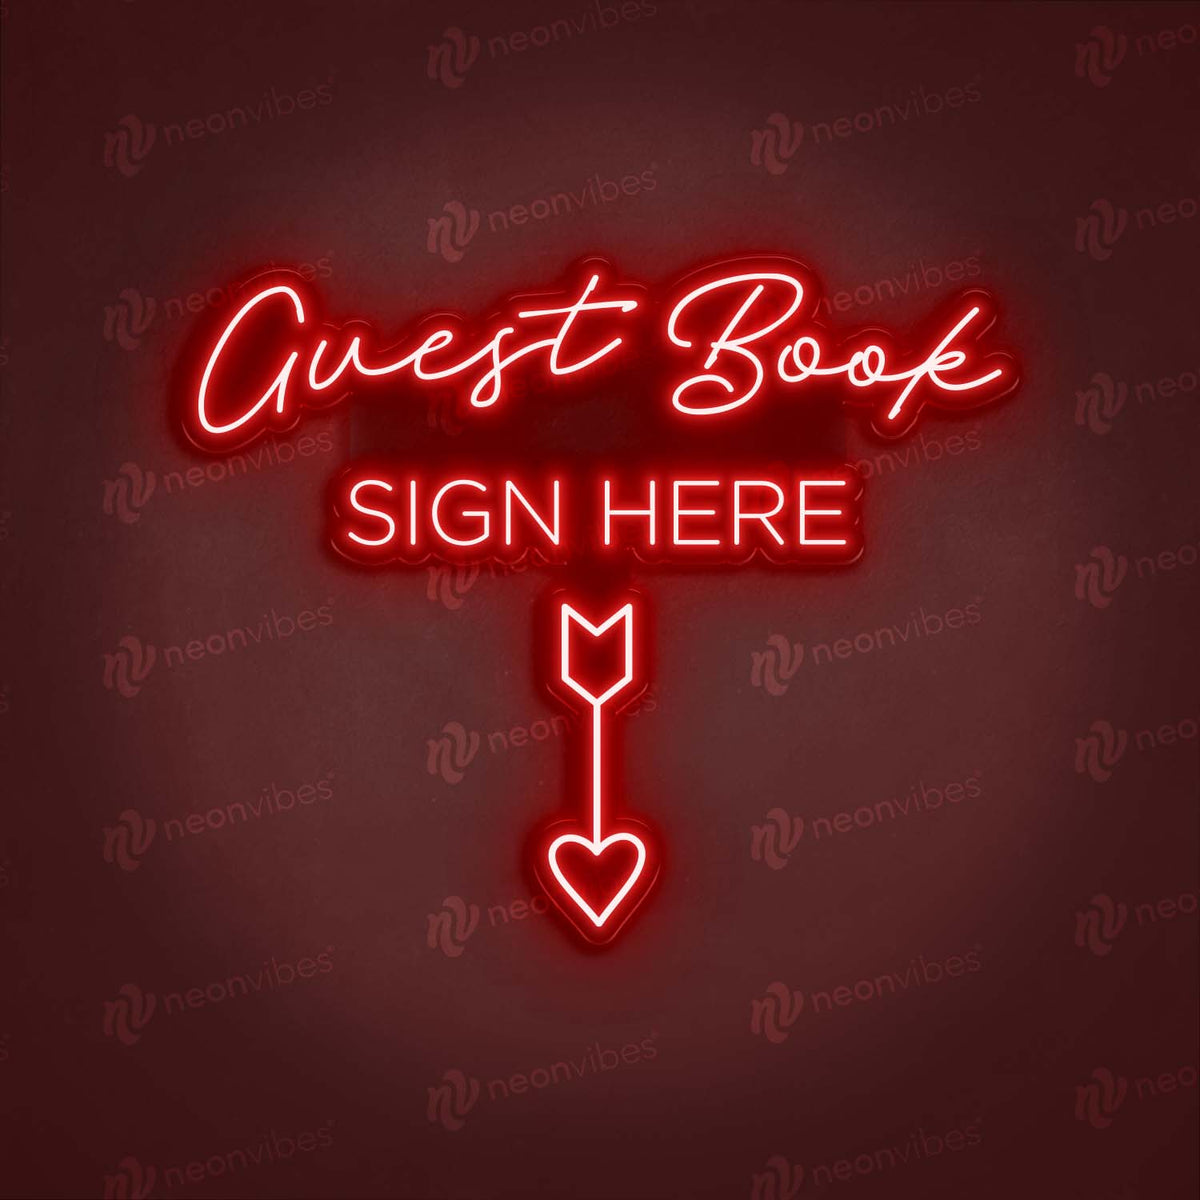 Guest Book neon sign